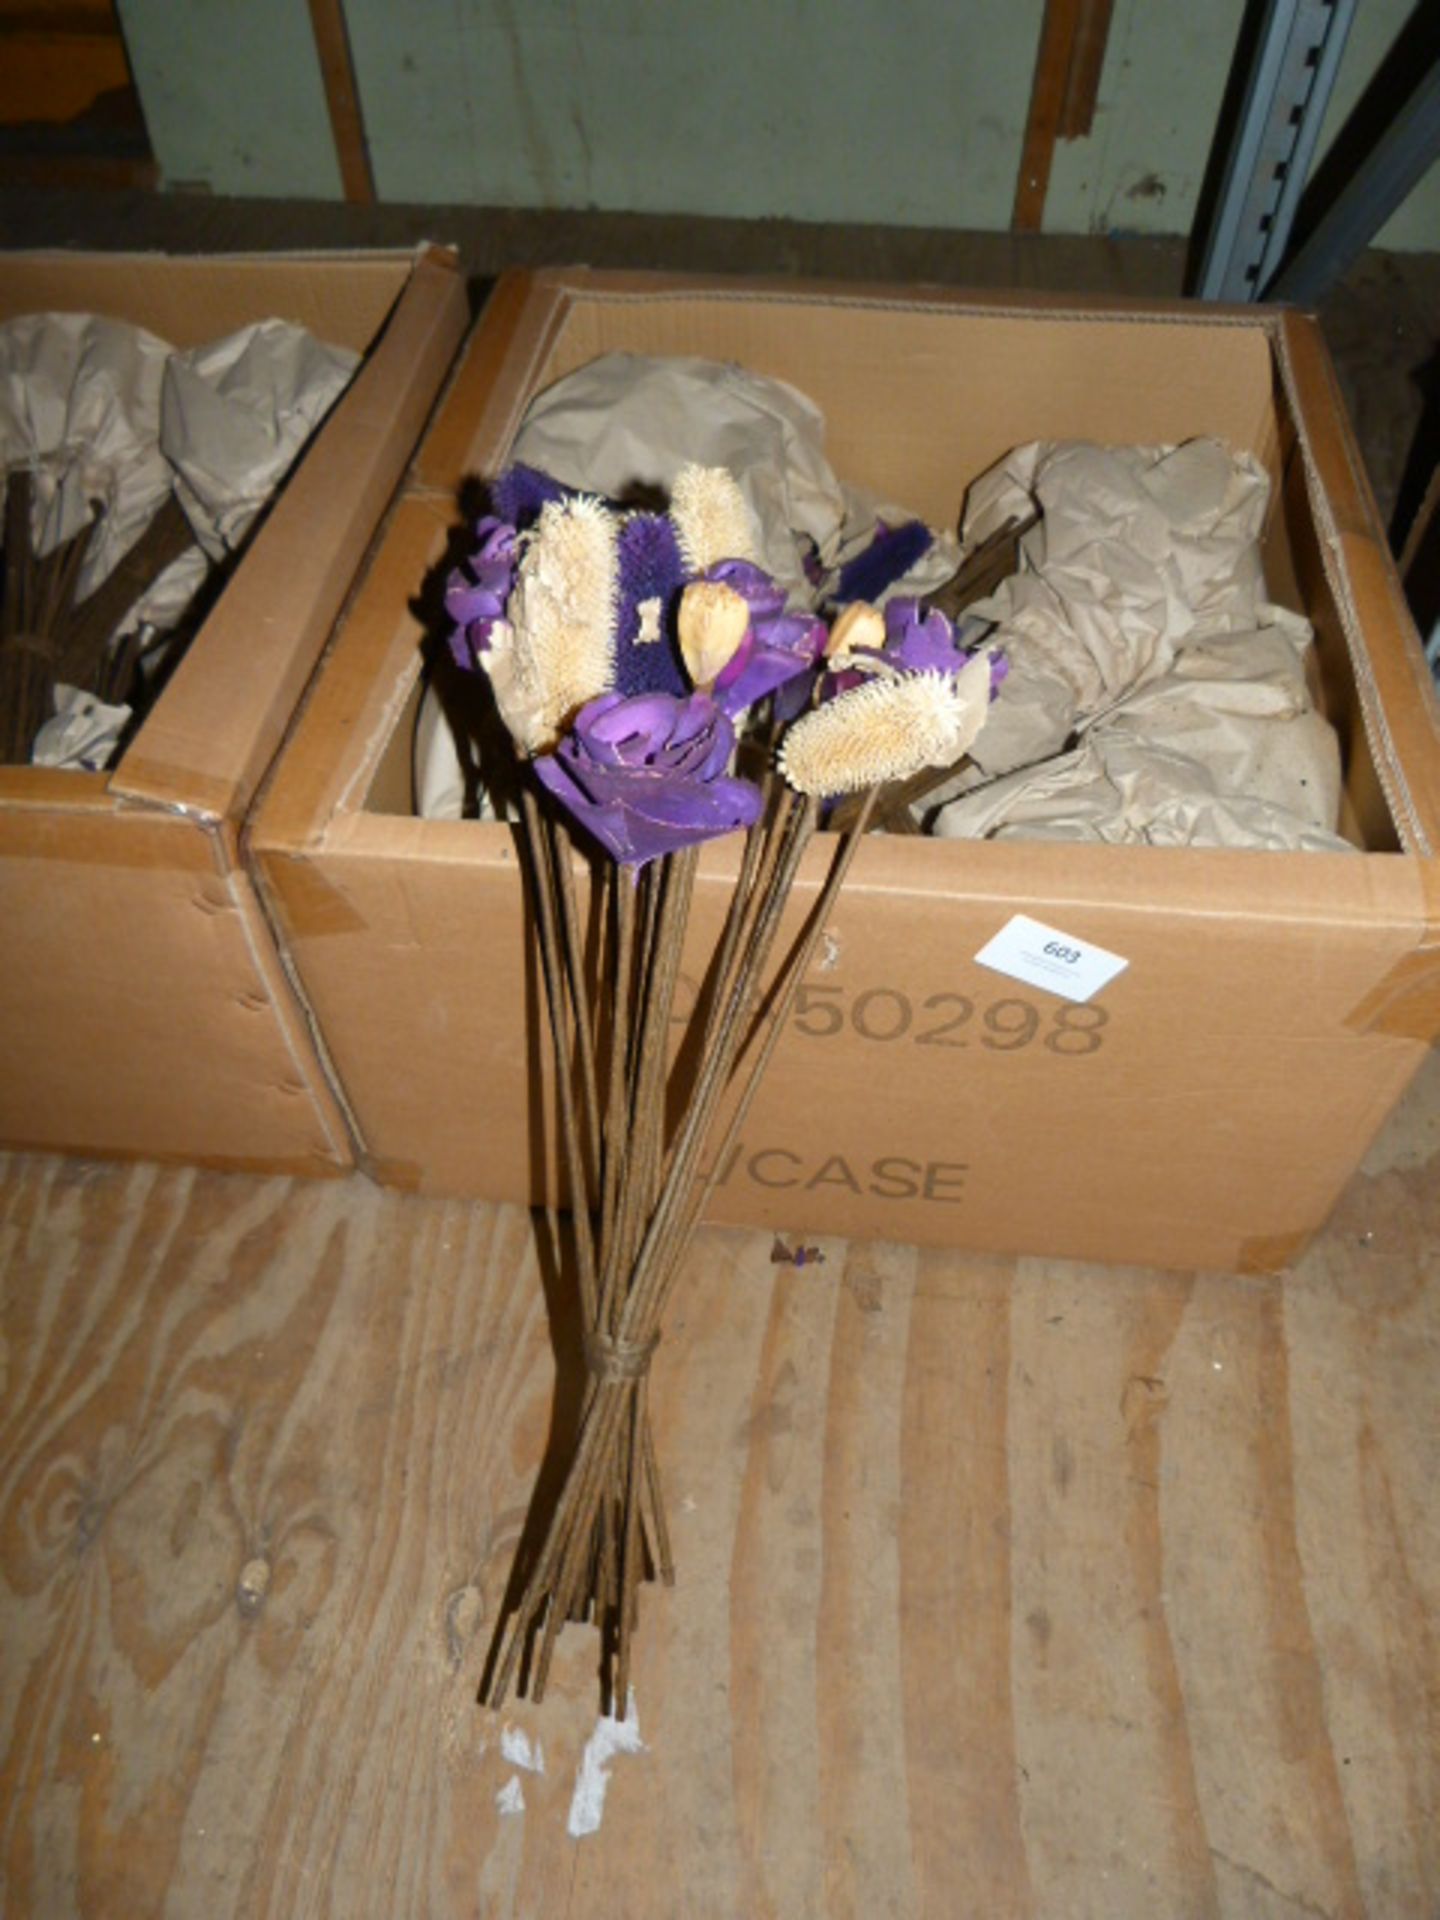 *Box Containing Twelve Bunches of Purple and Natural Floral Decorations with Seed Heads